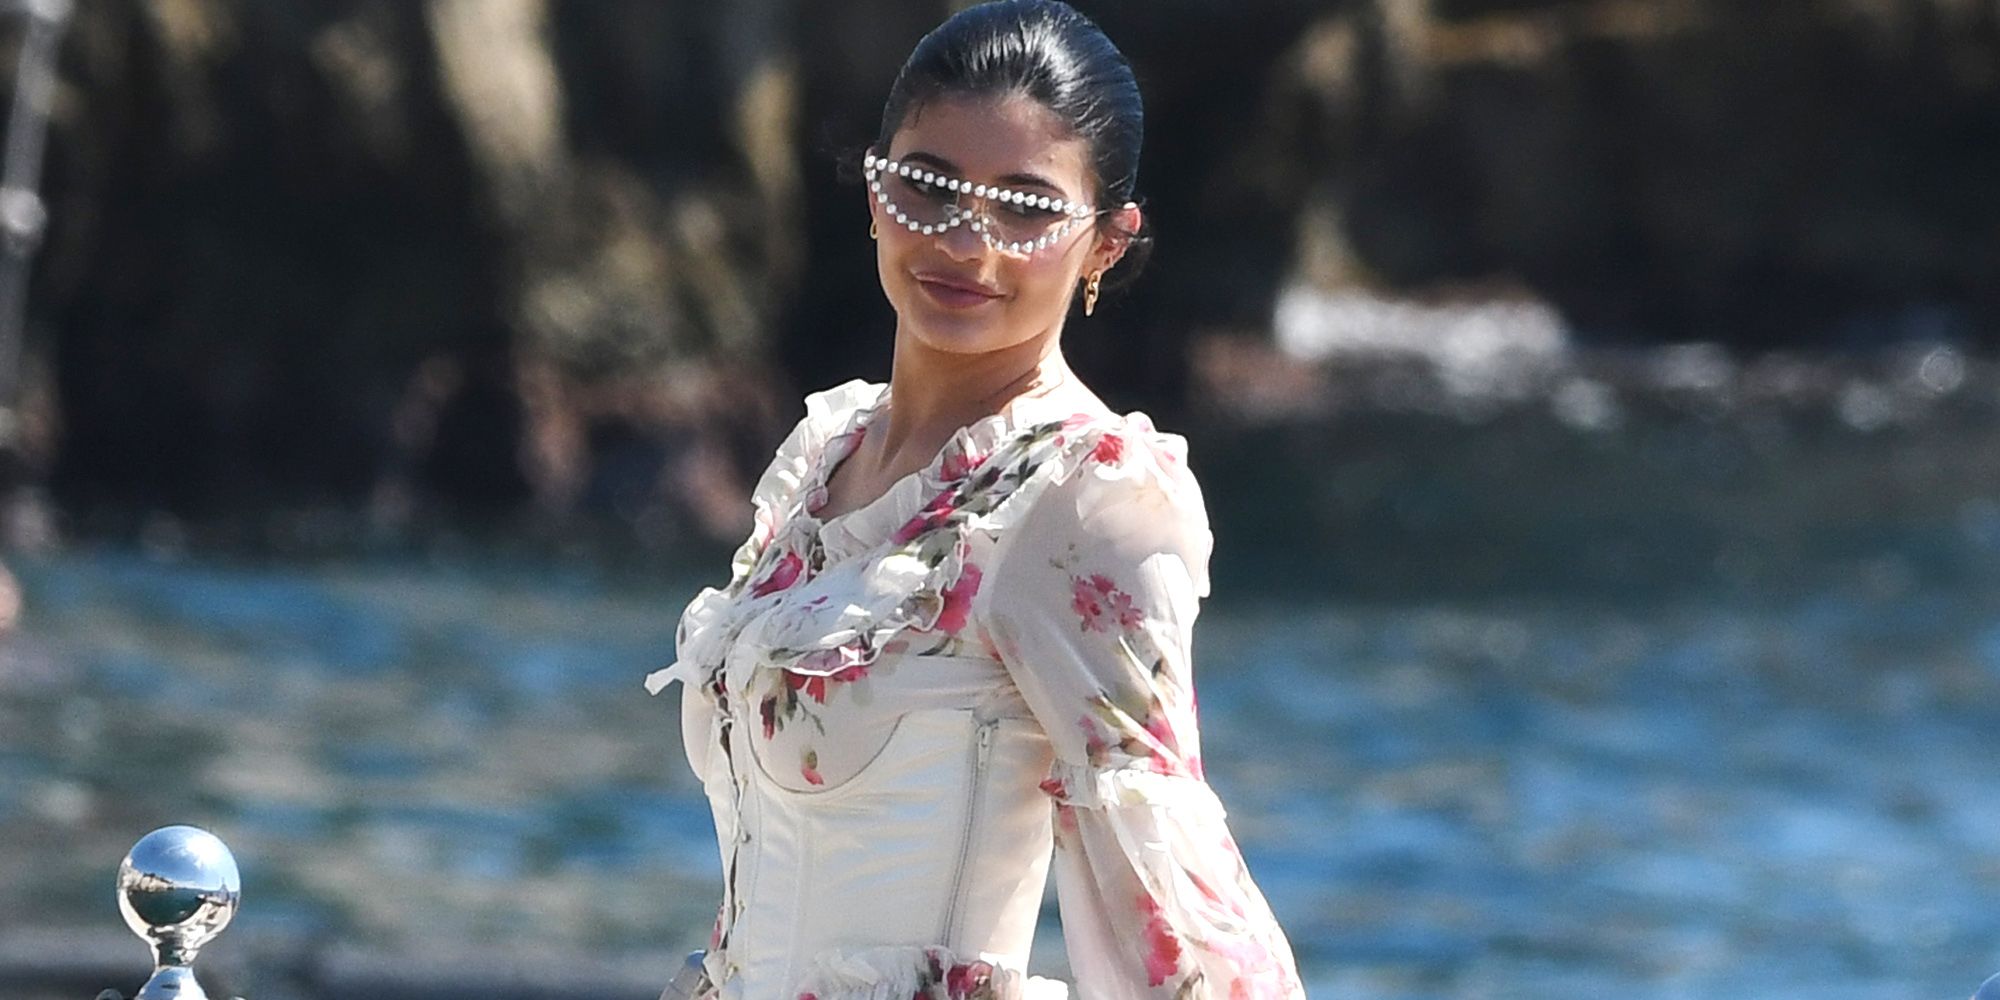 Kylie Jenner Wears Oversized Dior Sunglasses in Italy